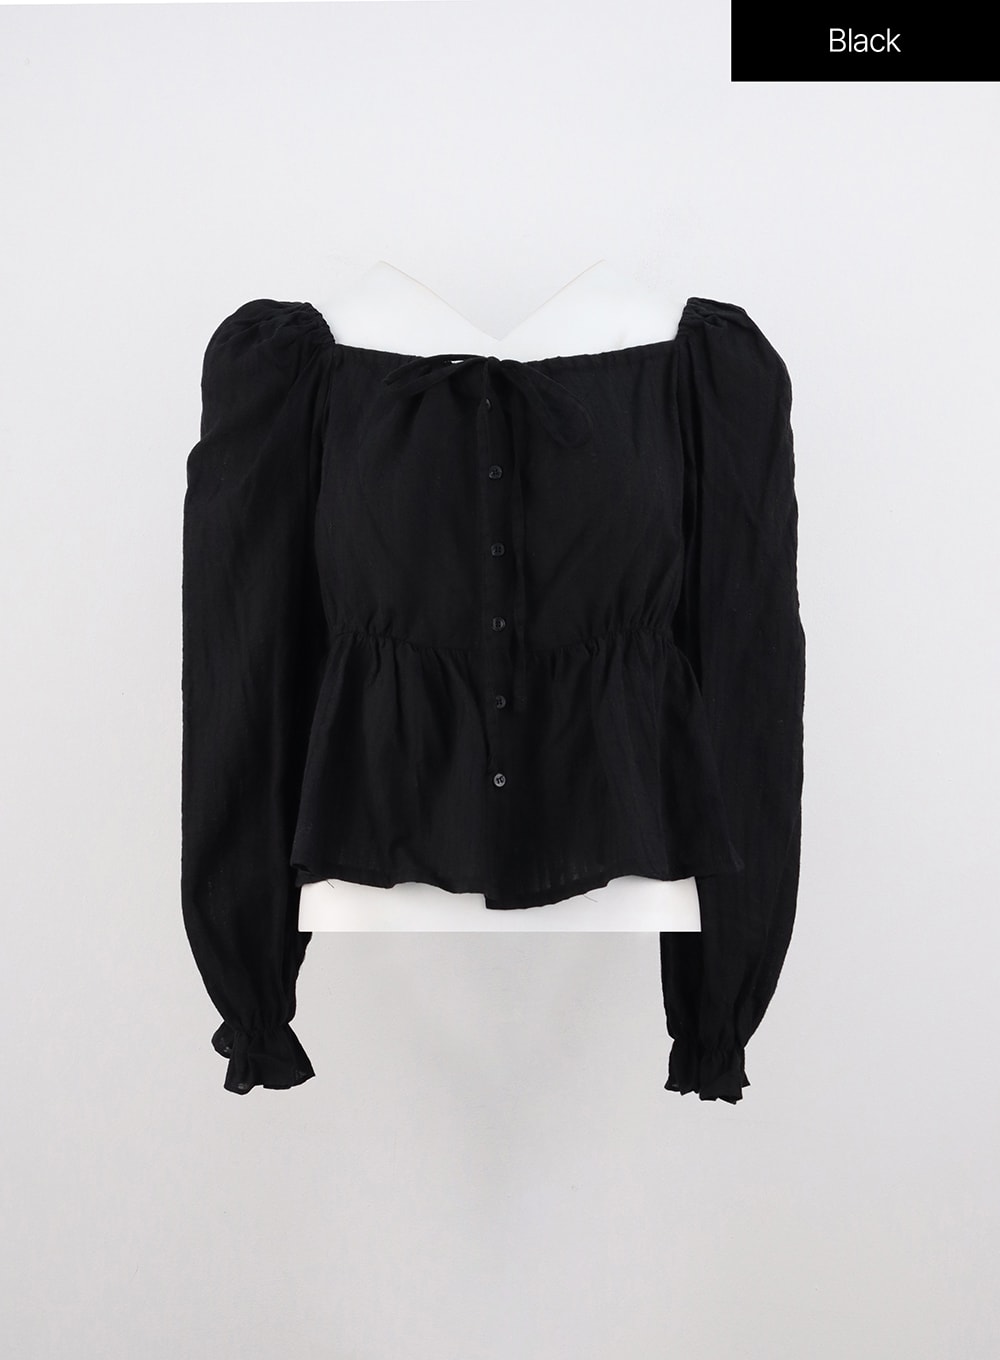 ruffled-square-neck-blouse-oo312 / Black